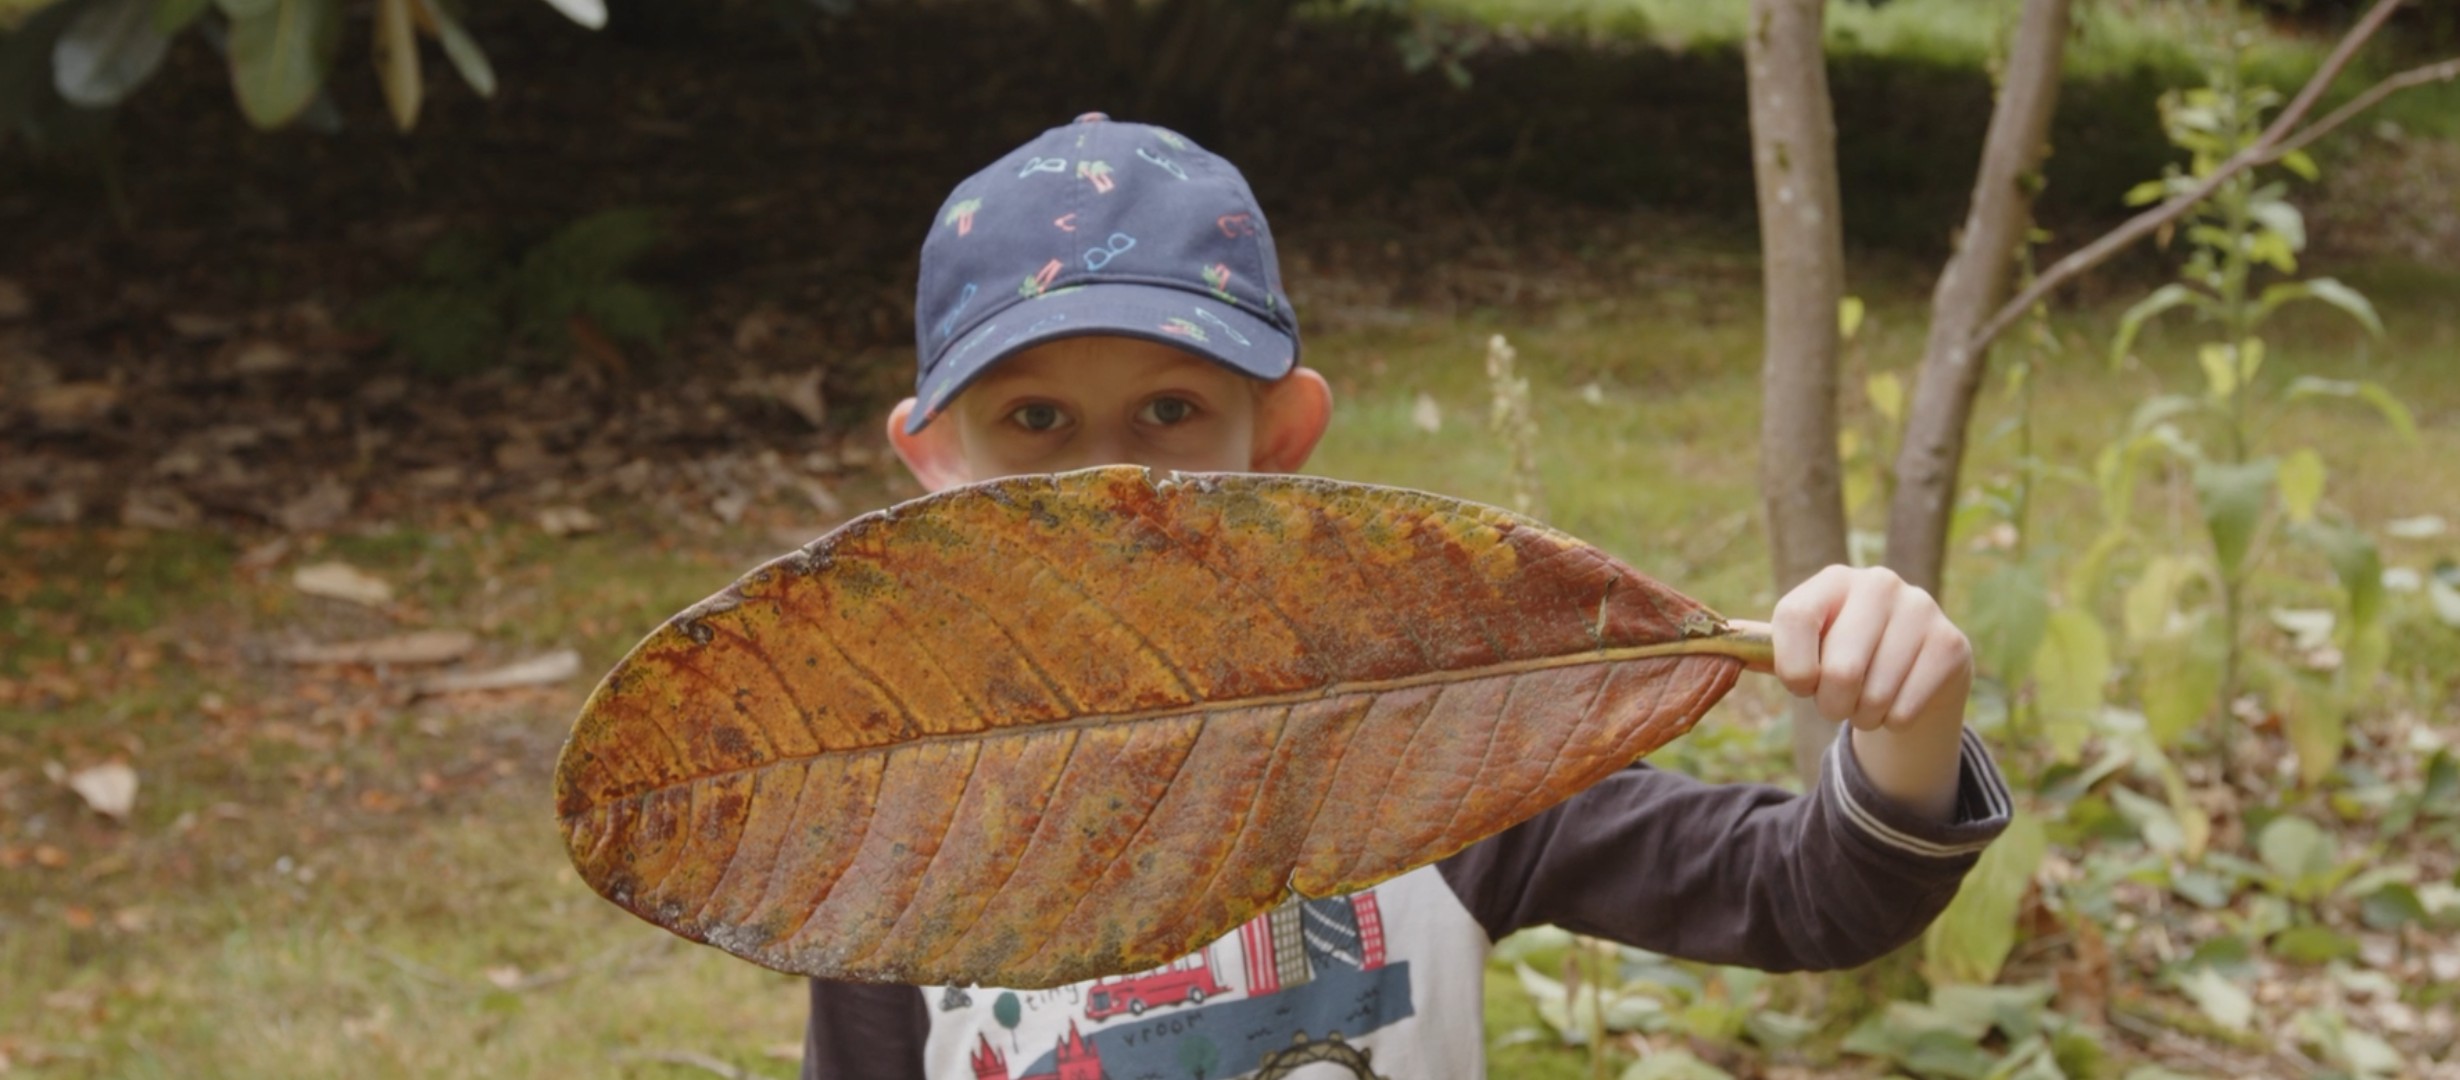 Young boy with blue hat holding a giant leaf which is held in front of his face